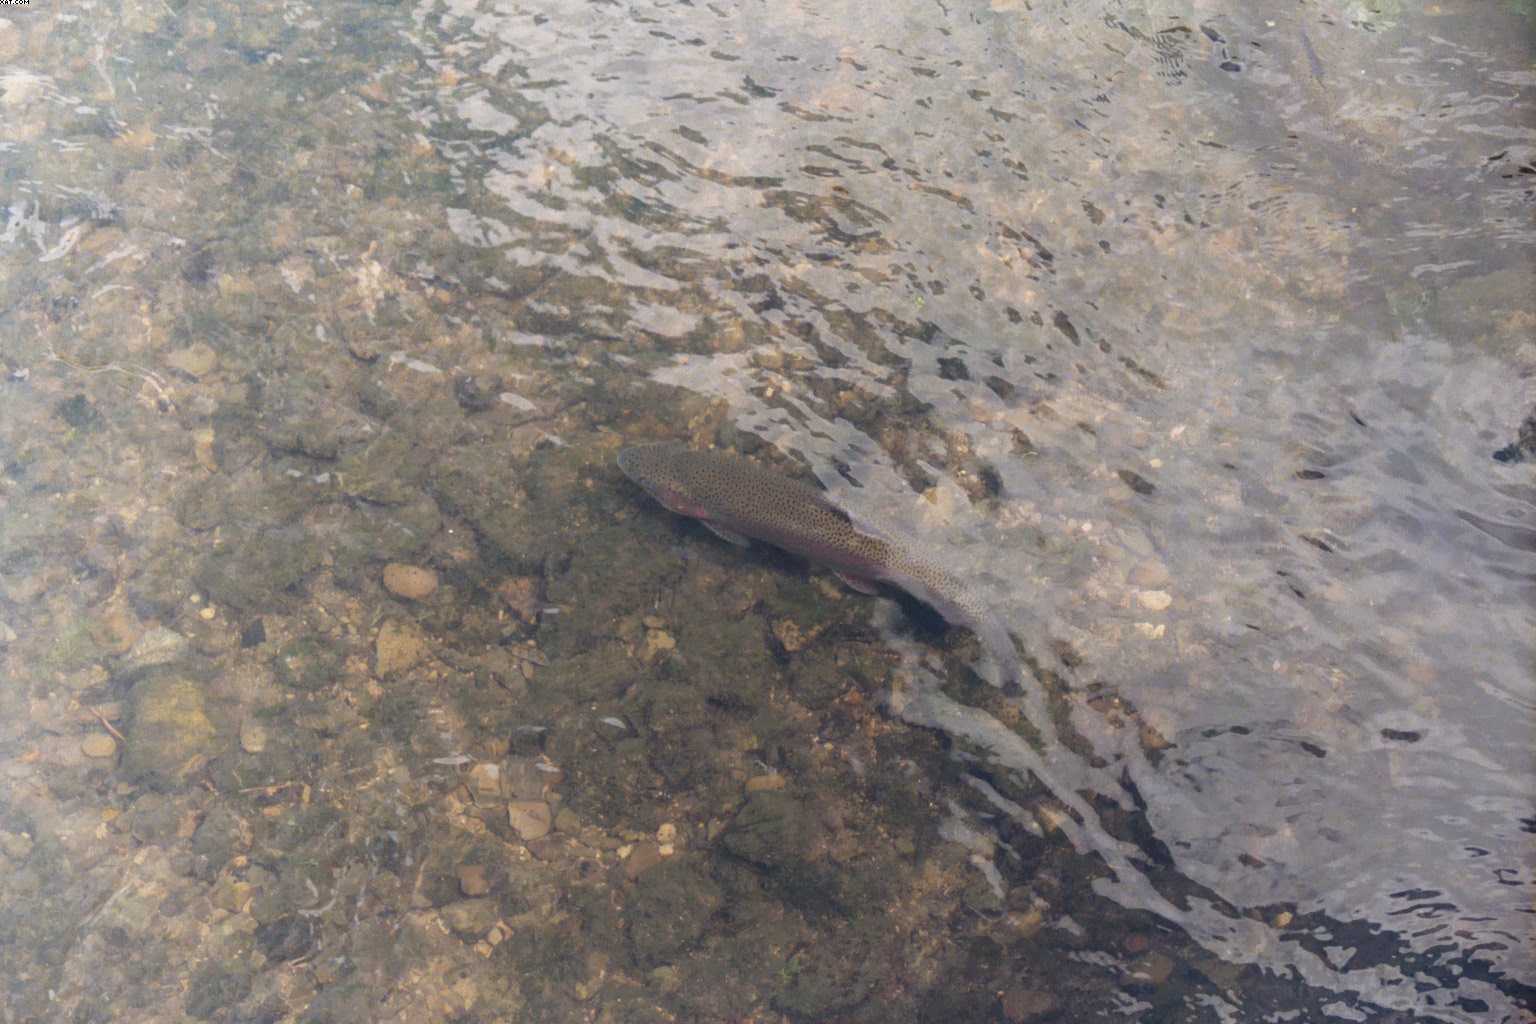 See, we saw a trout.